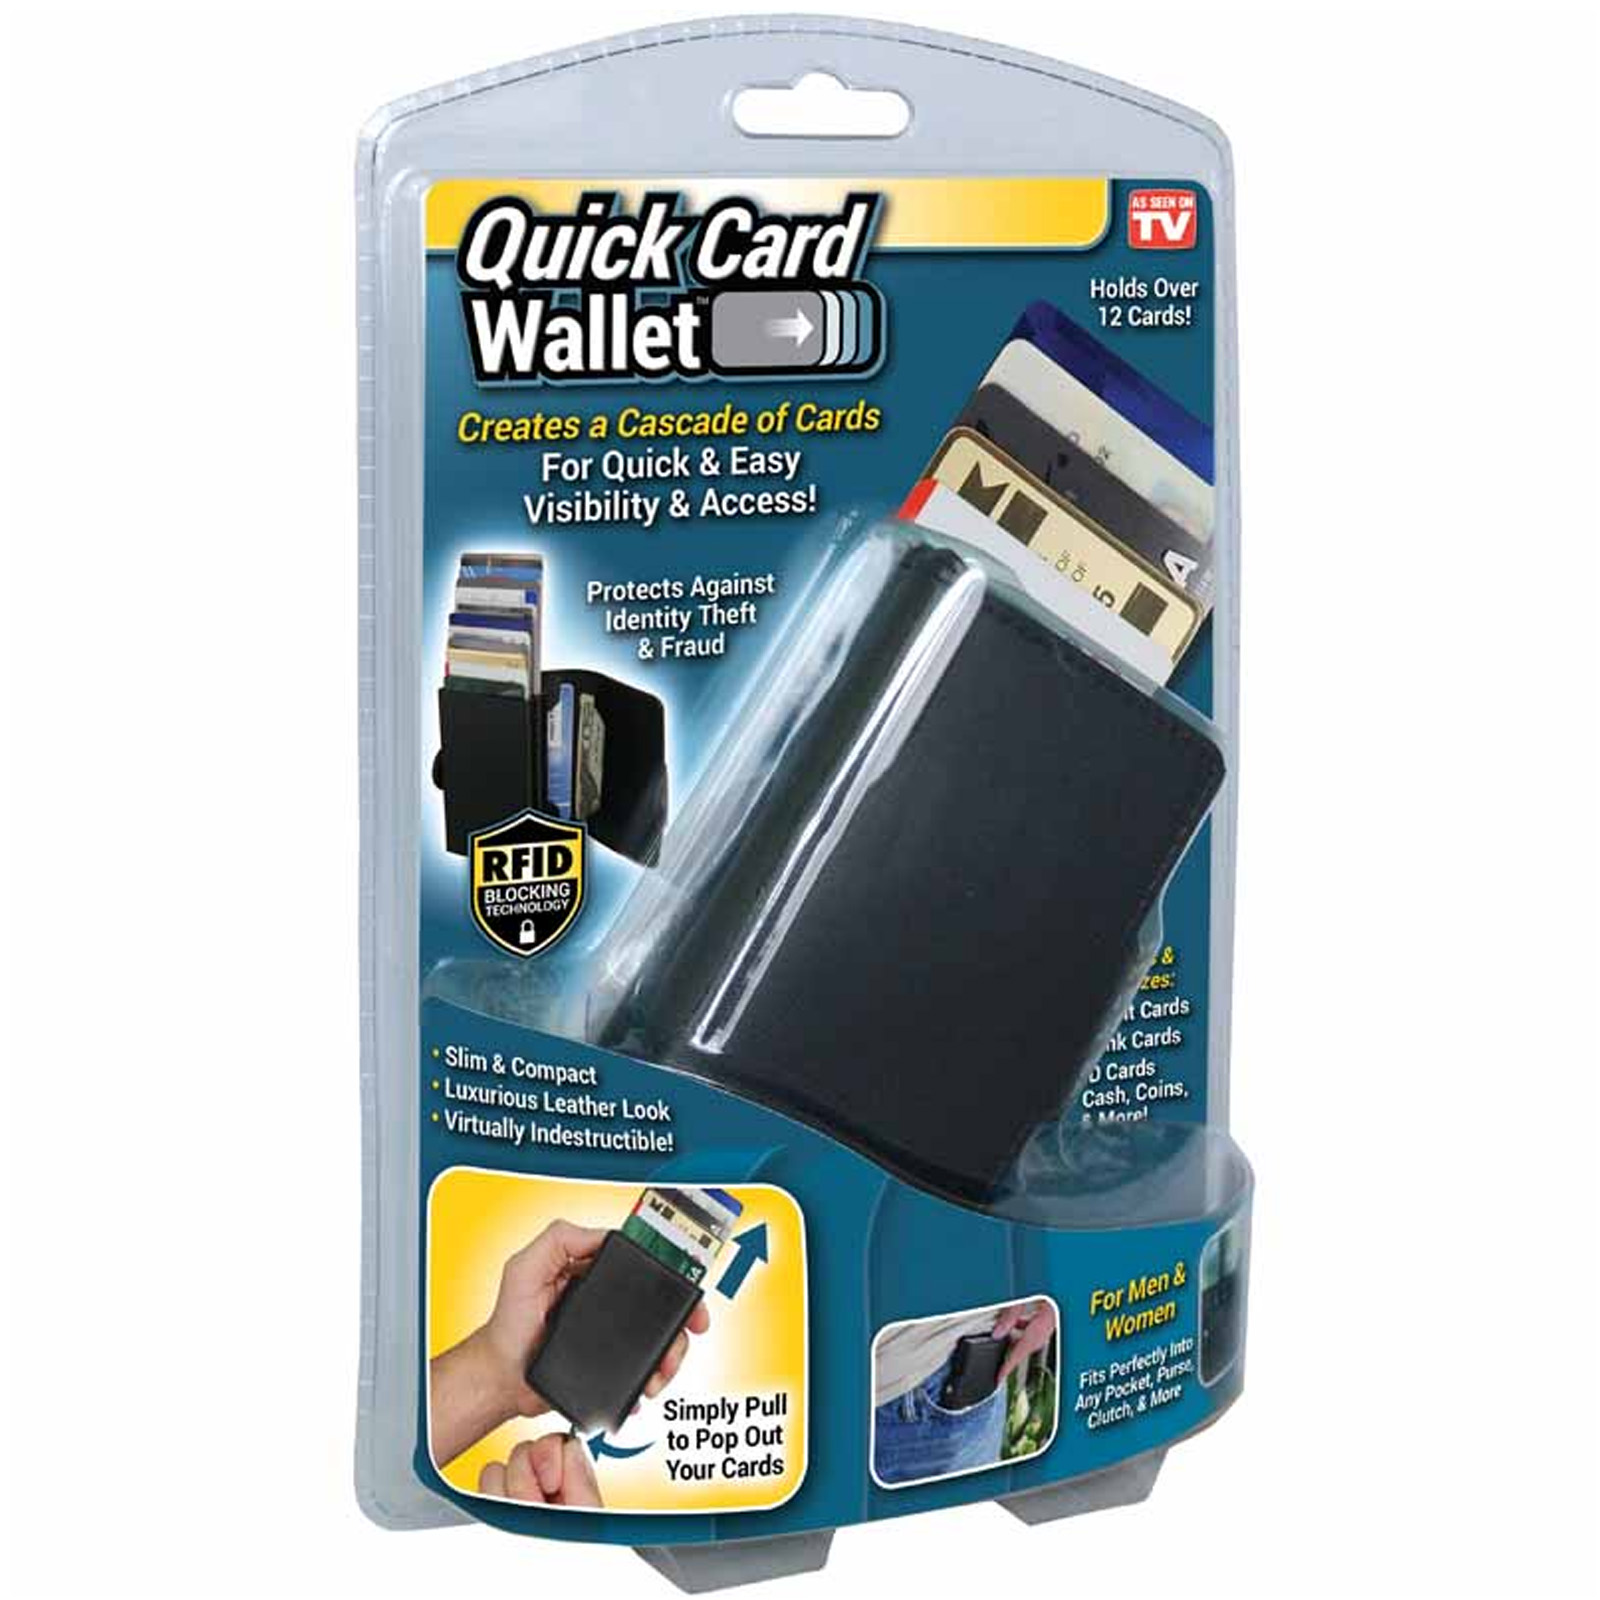 QUICK CARD WALLET | Best Of As Seen On TV